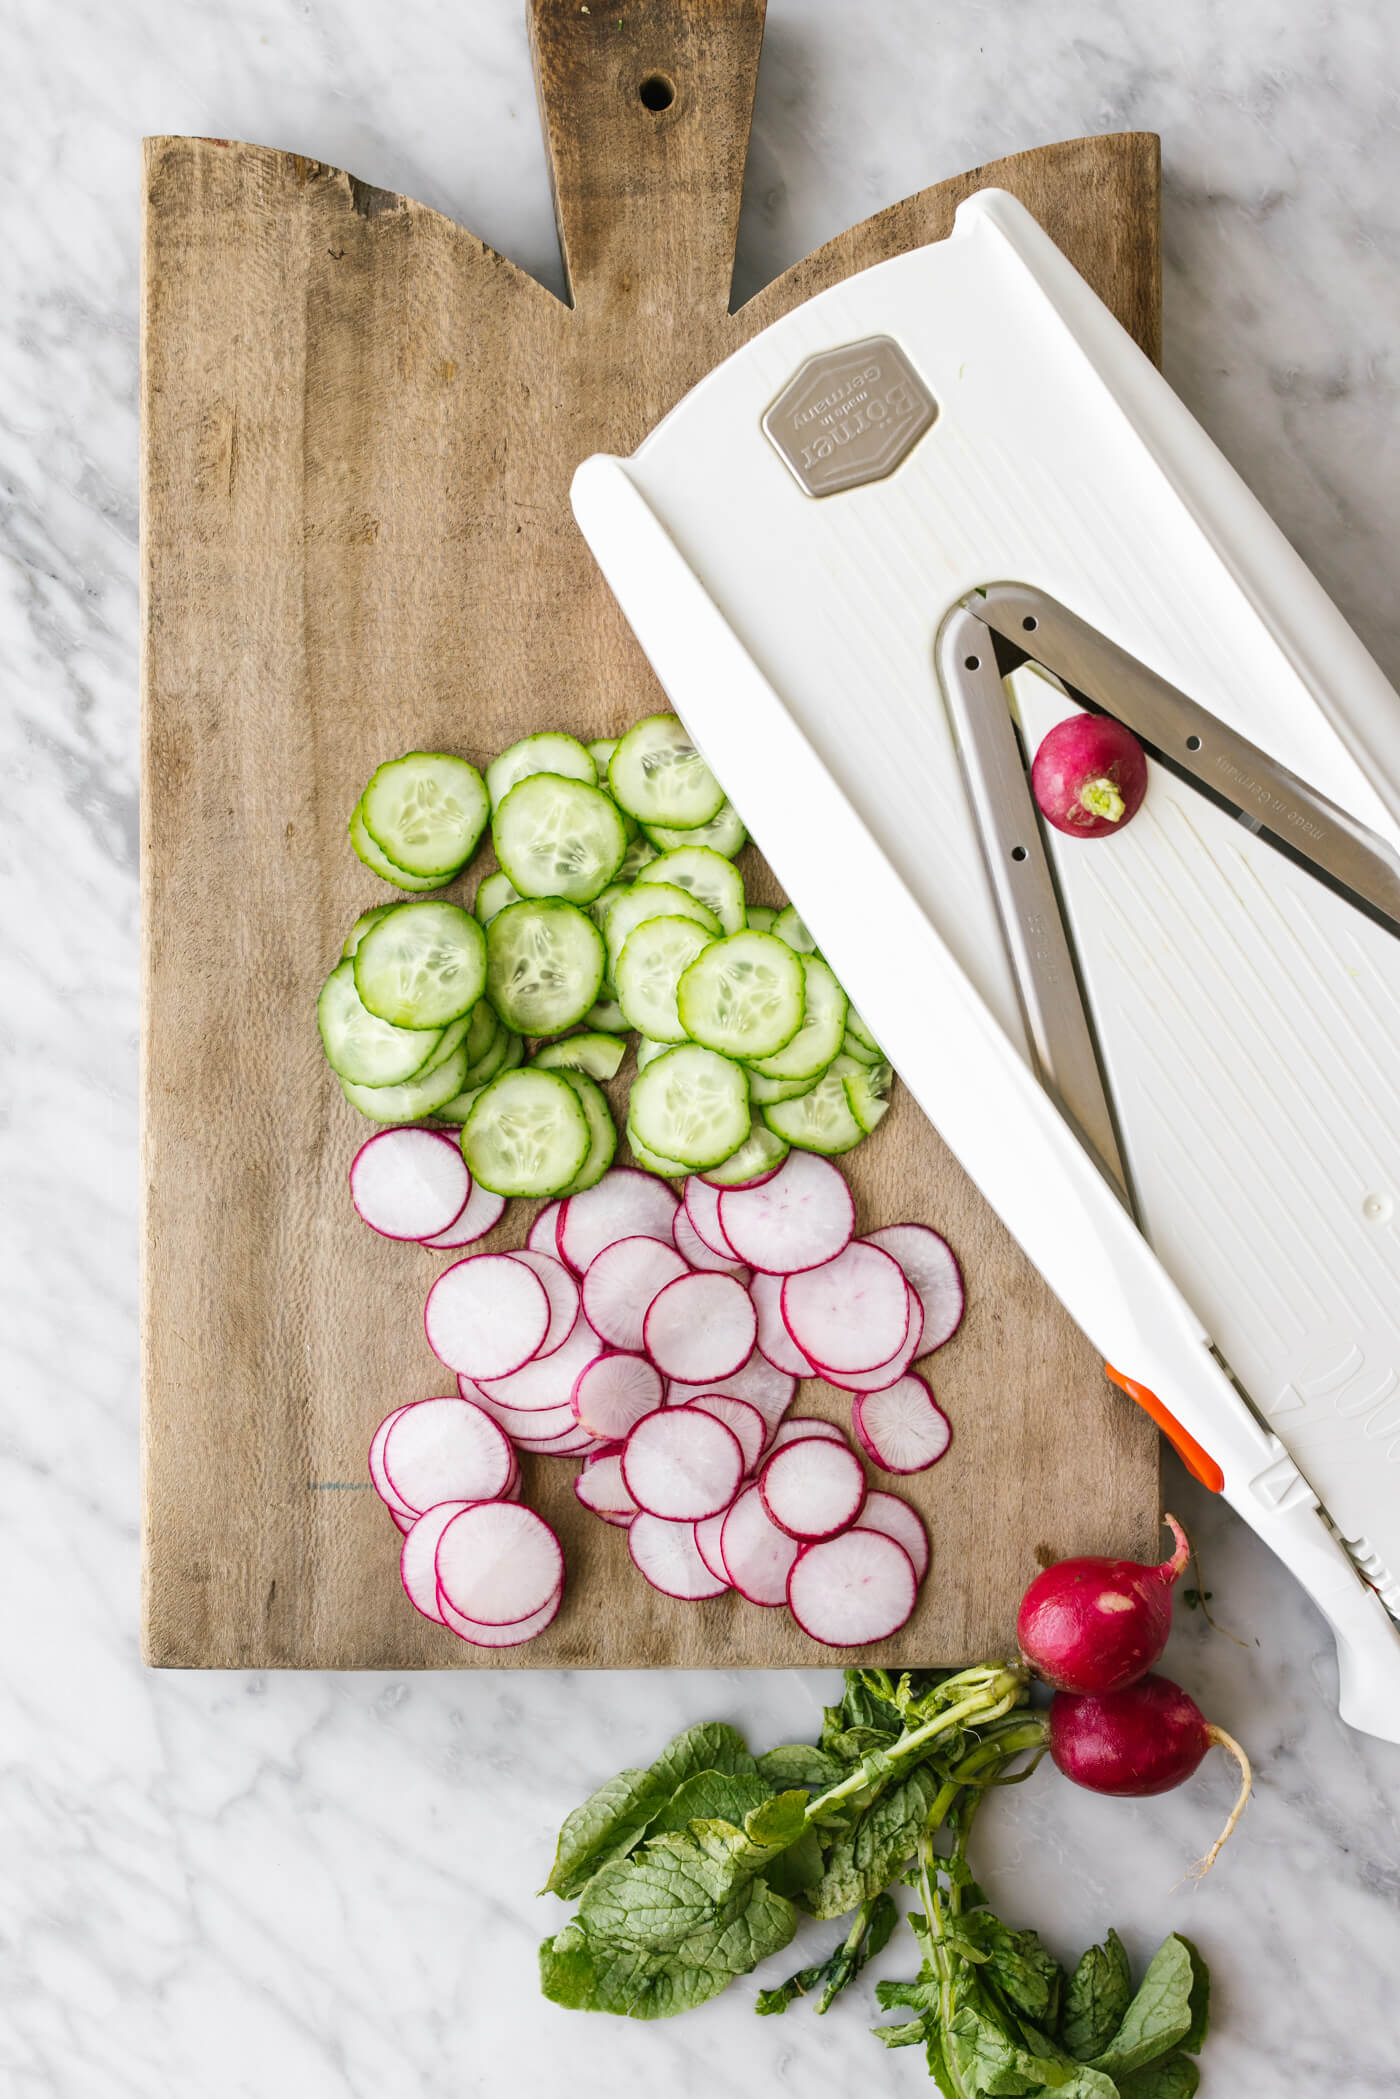 Slicing cucumbers and radish with a mandolin for a salad.